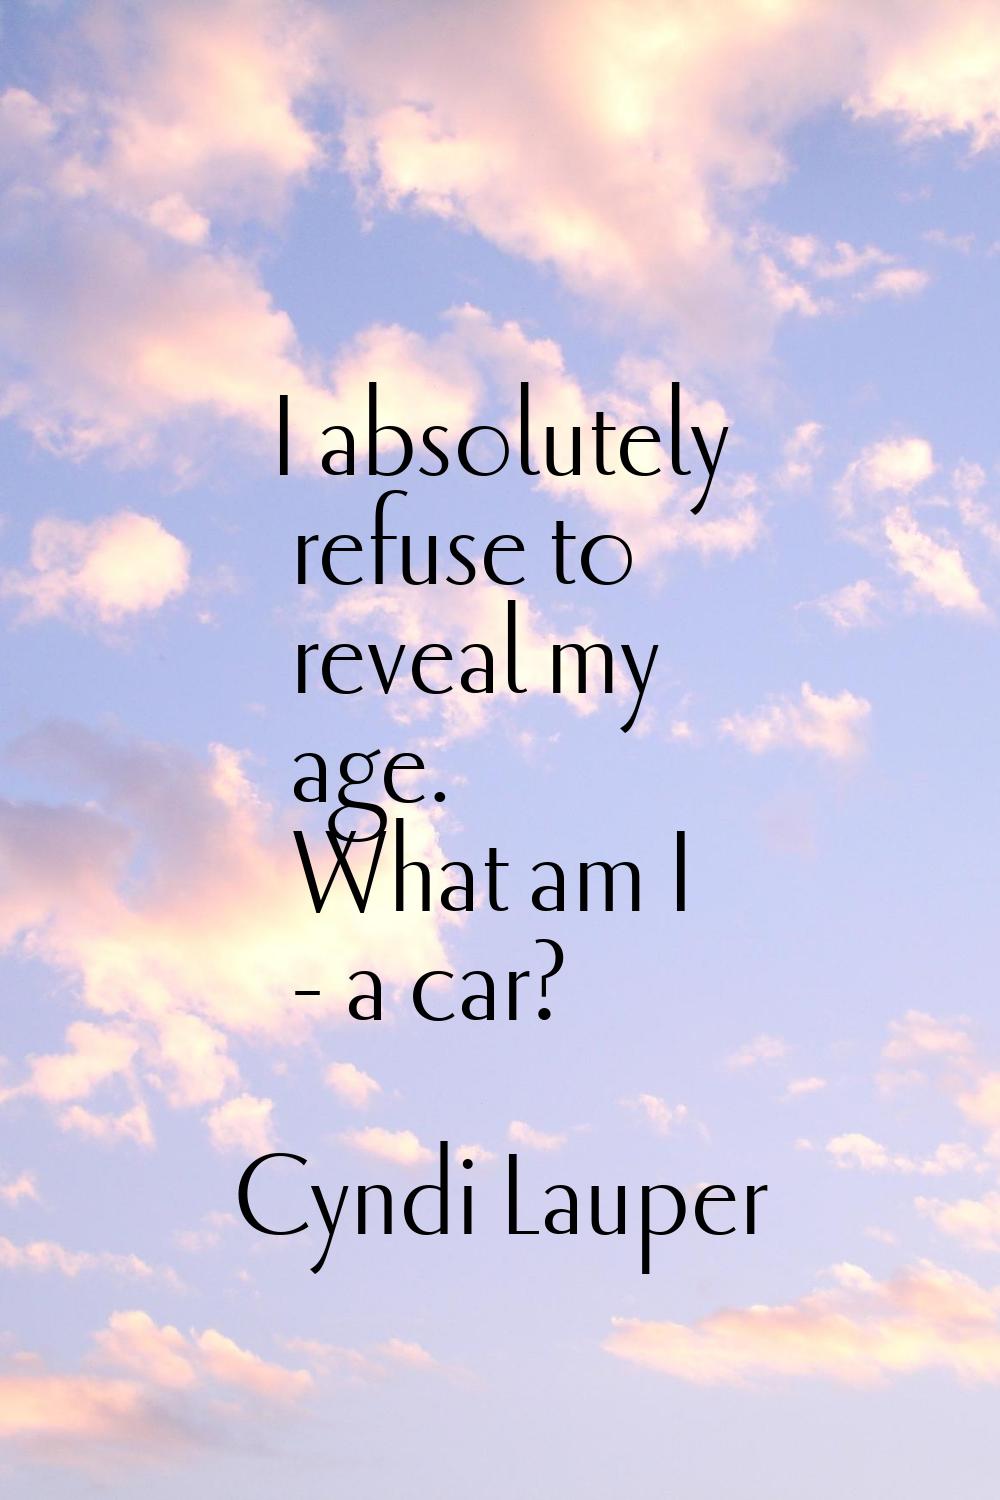 I absolutely refuse to reveal my age. What am I - a car?